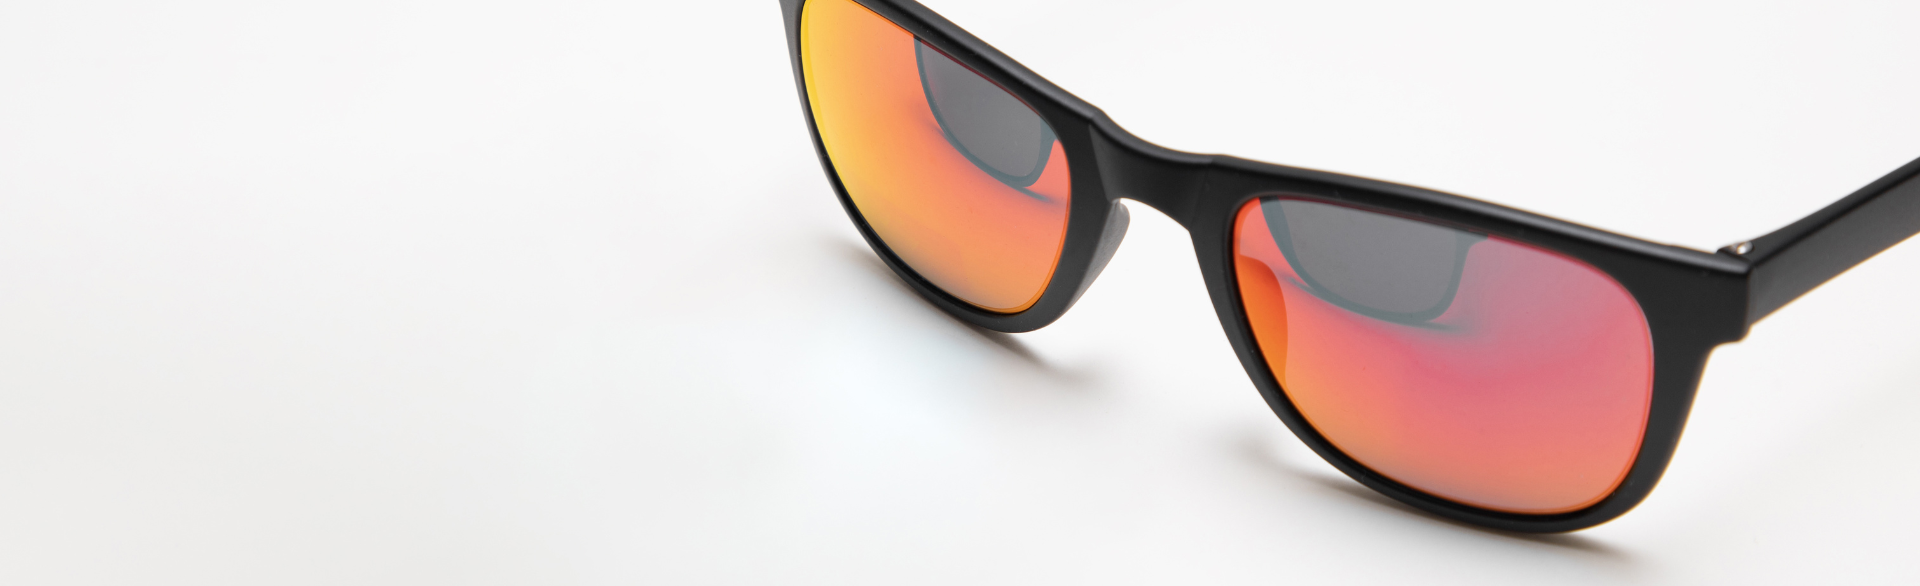 Image of a sunglasses with mirrored lenses